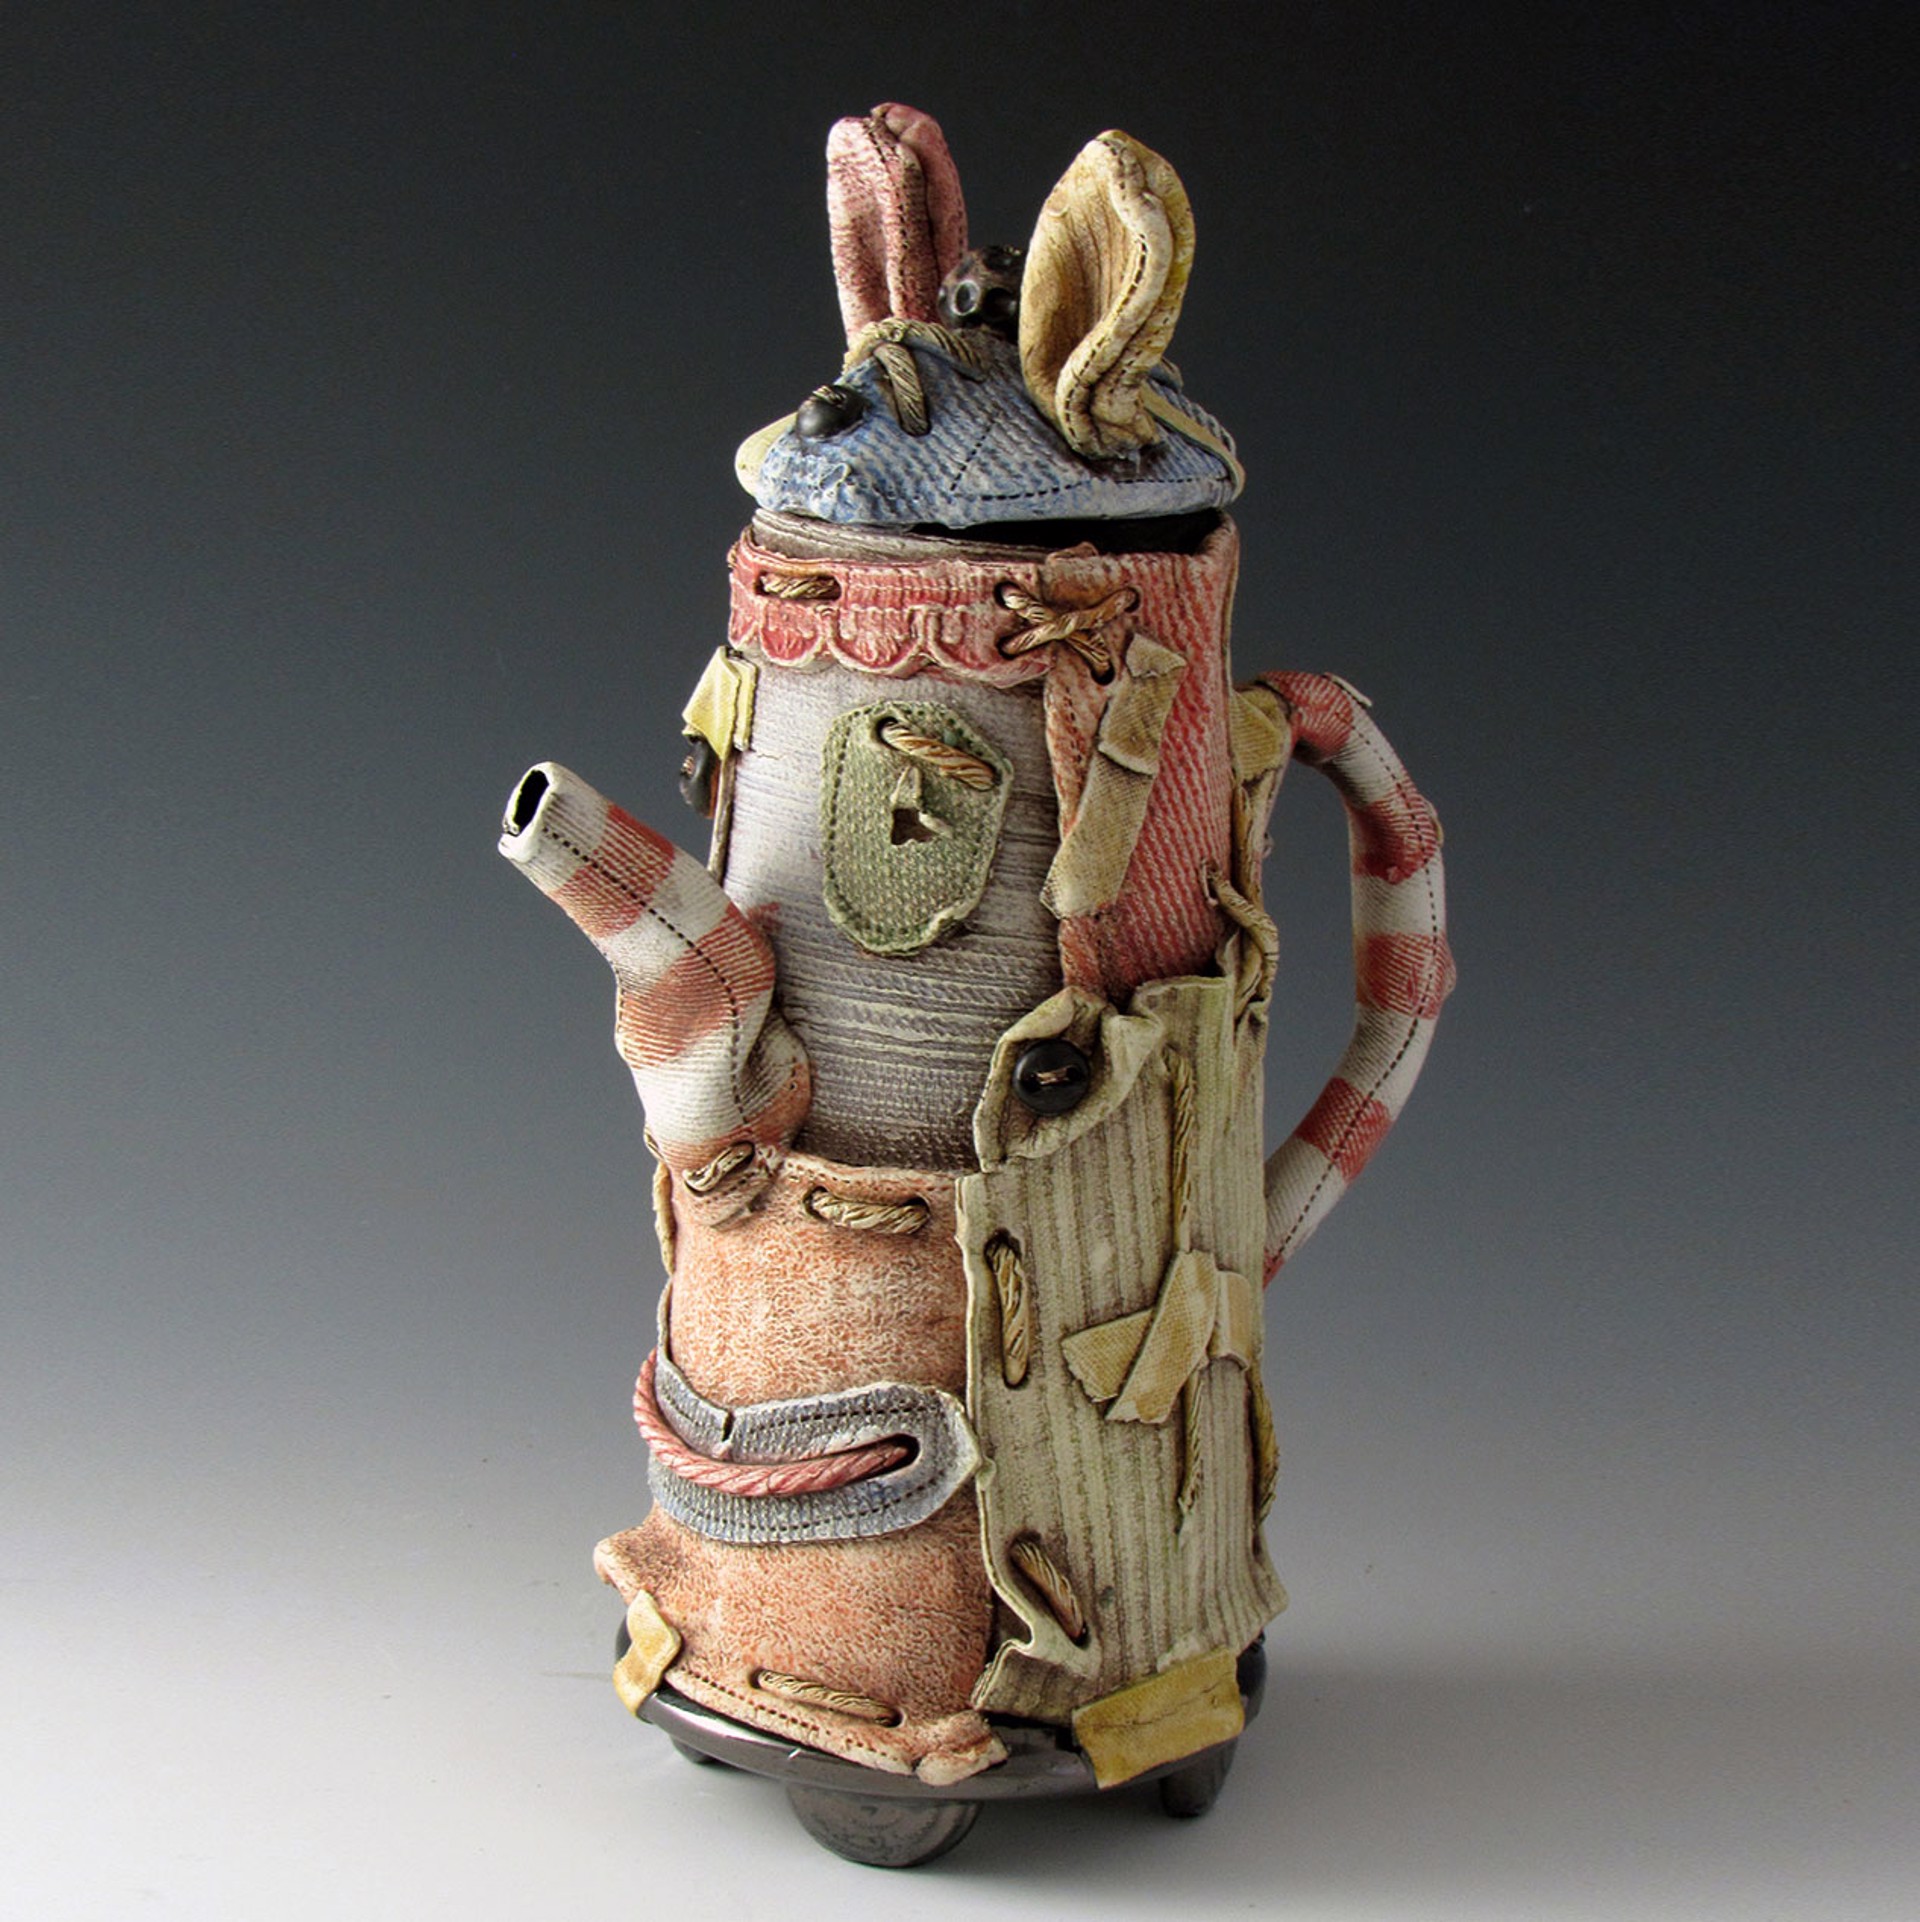 Character Teapot #1 by Keith Schneider